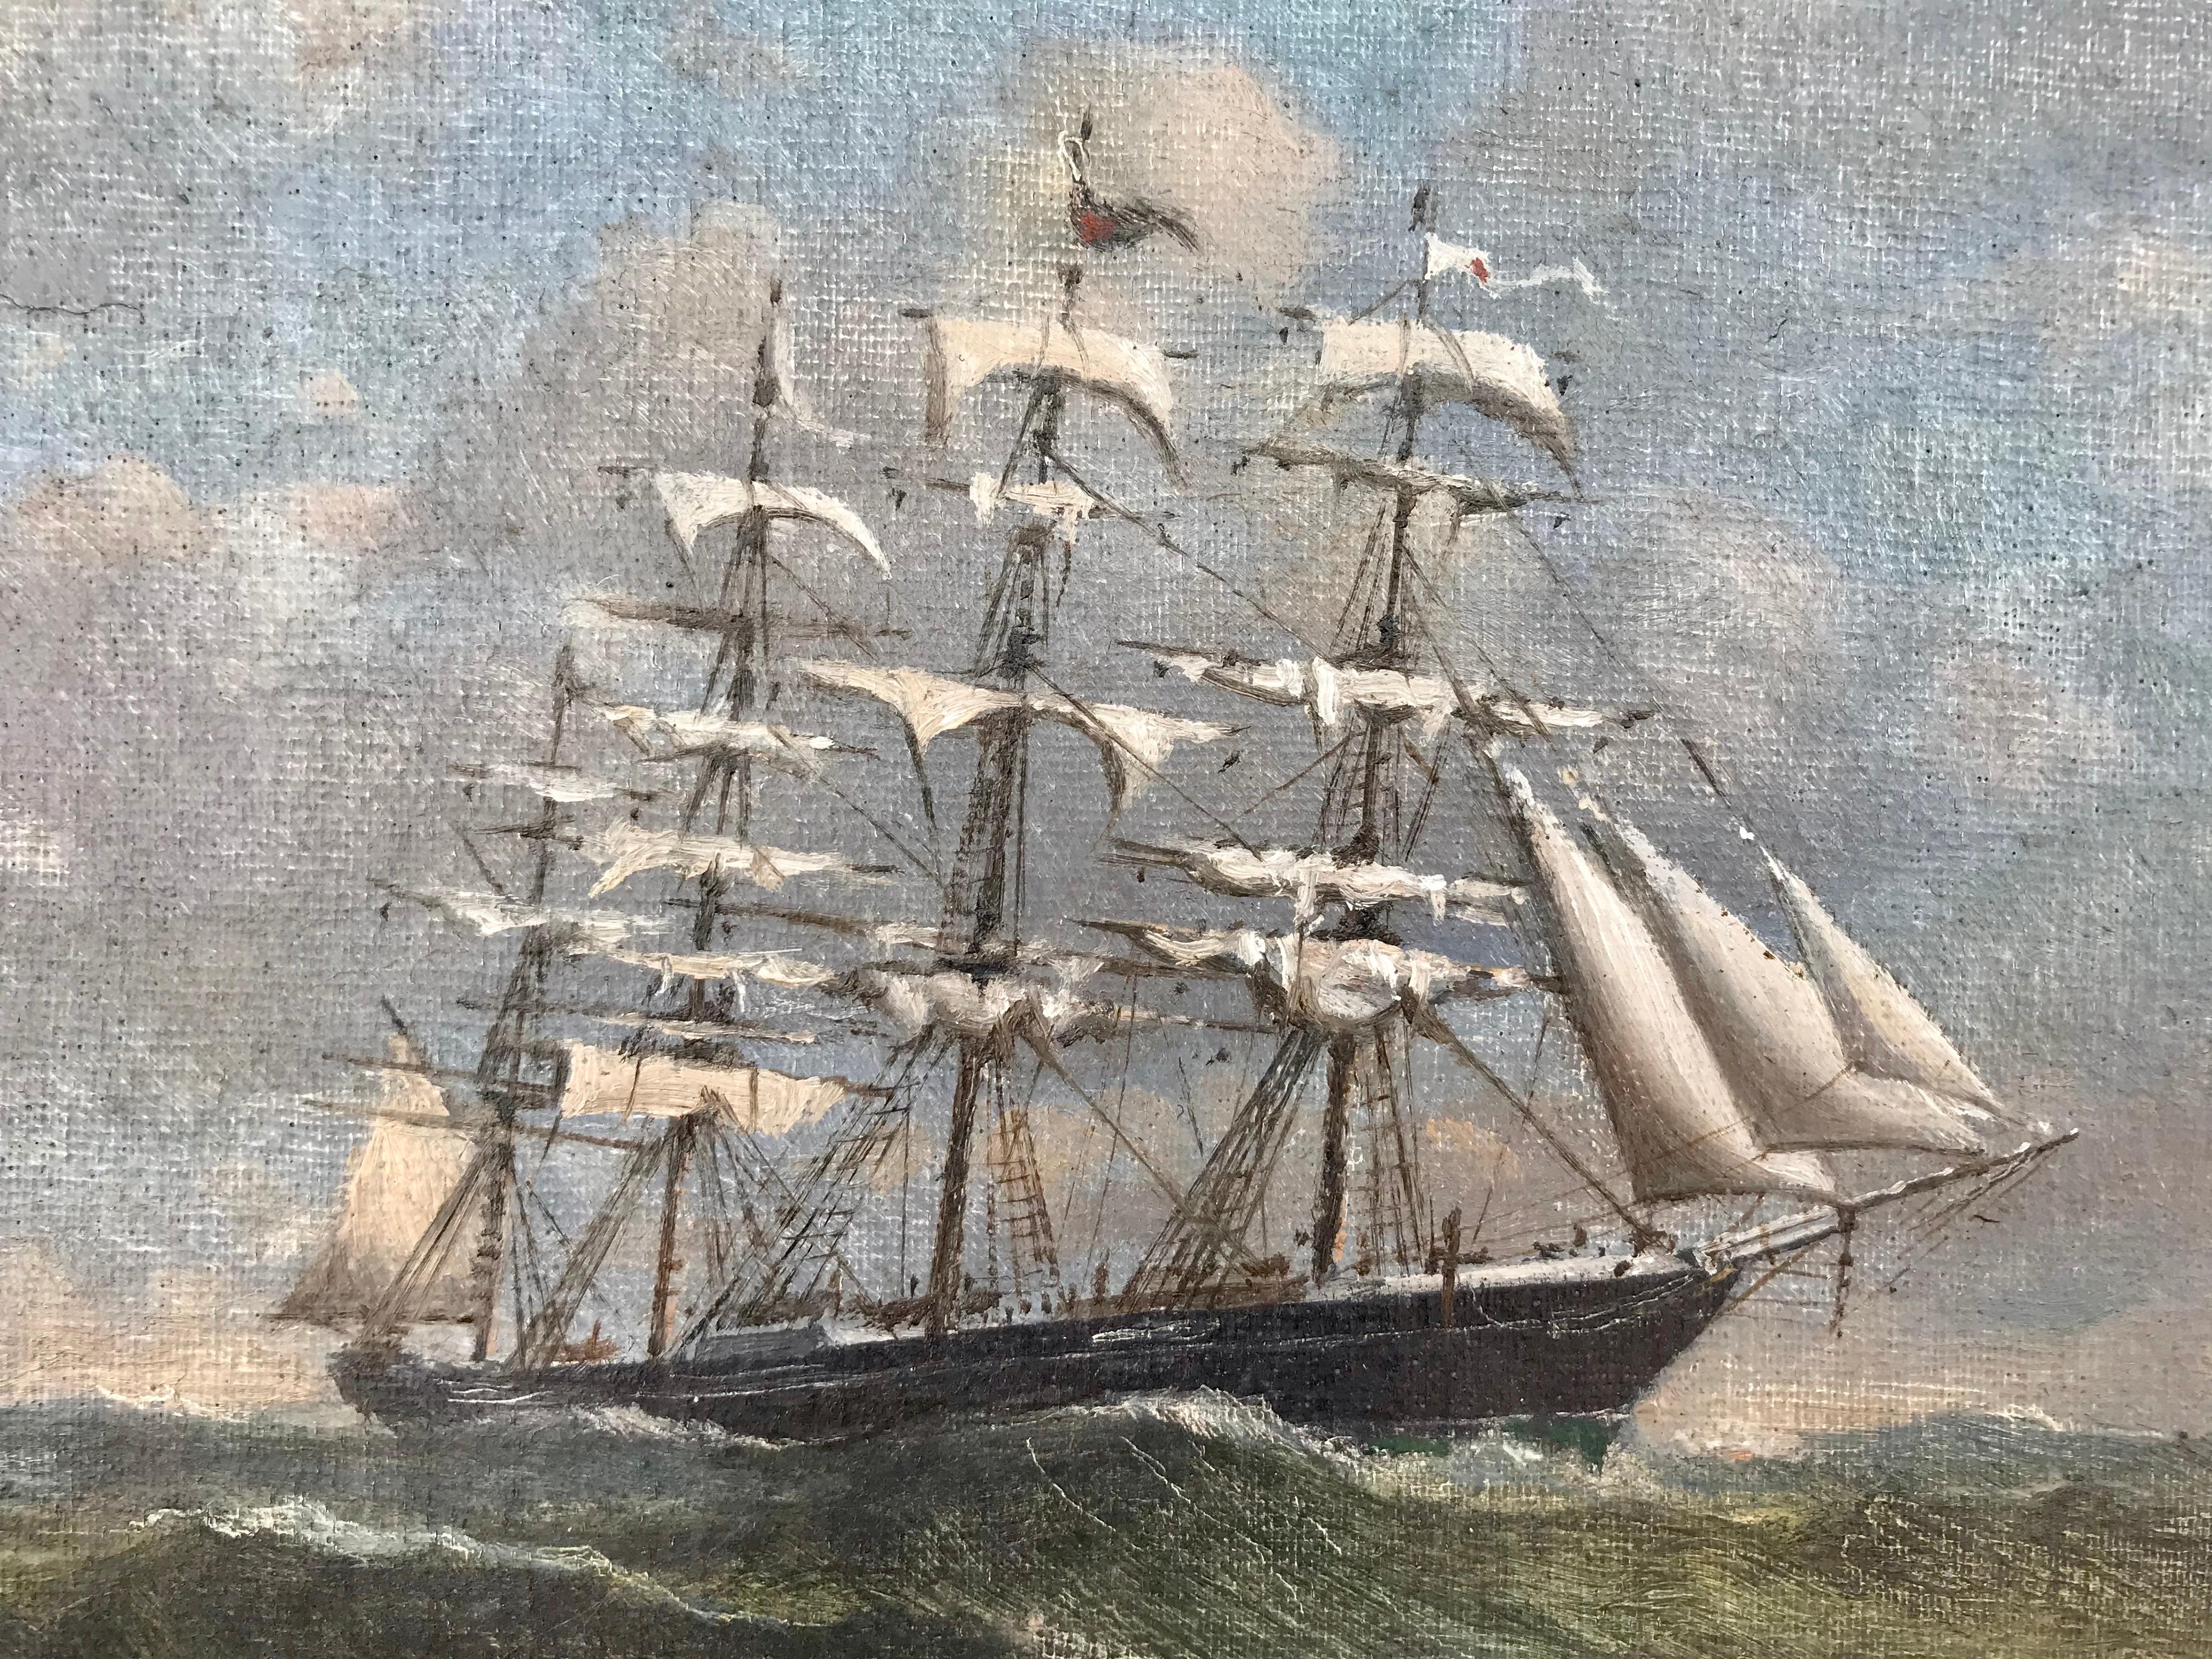 “Clipper in High Seas” - Academic Painting by Unknown